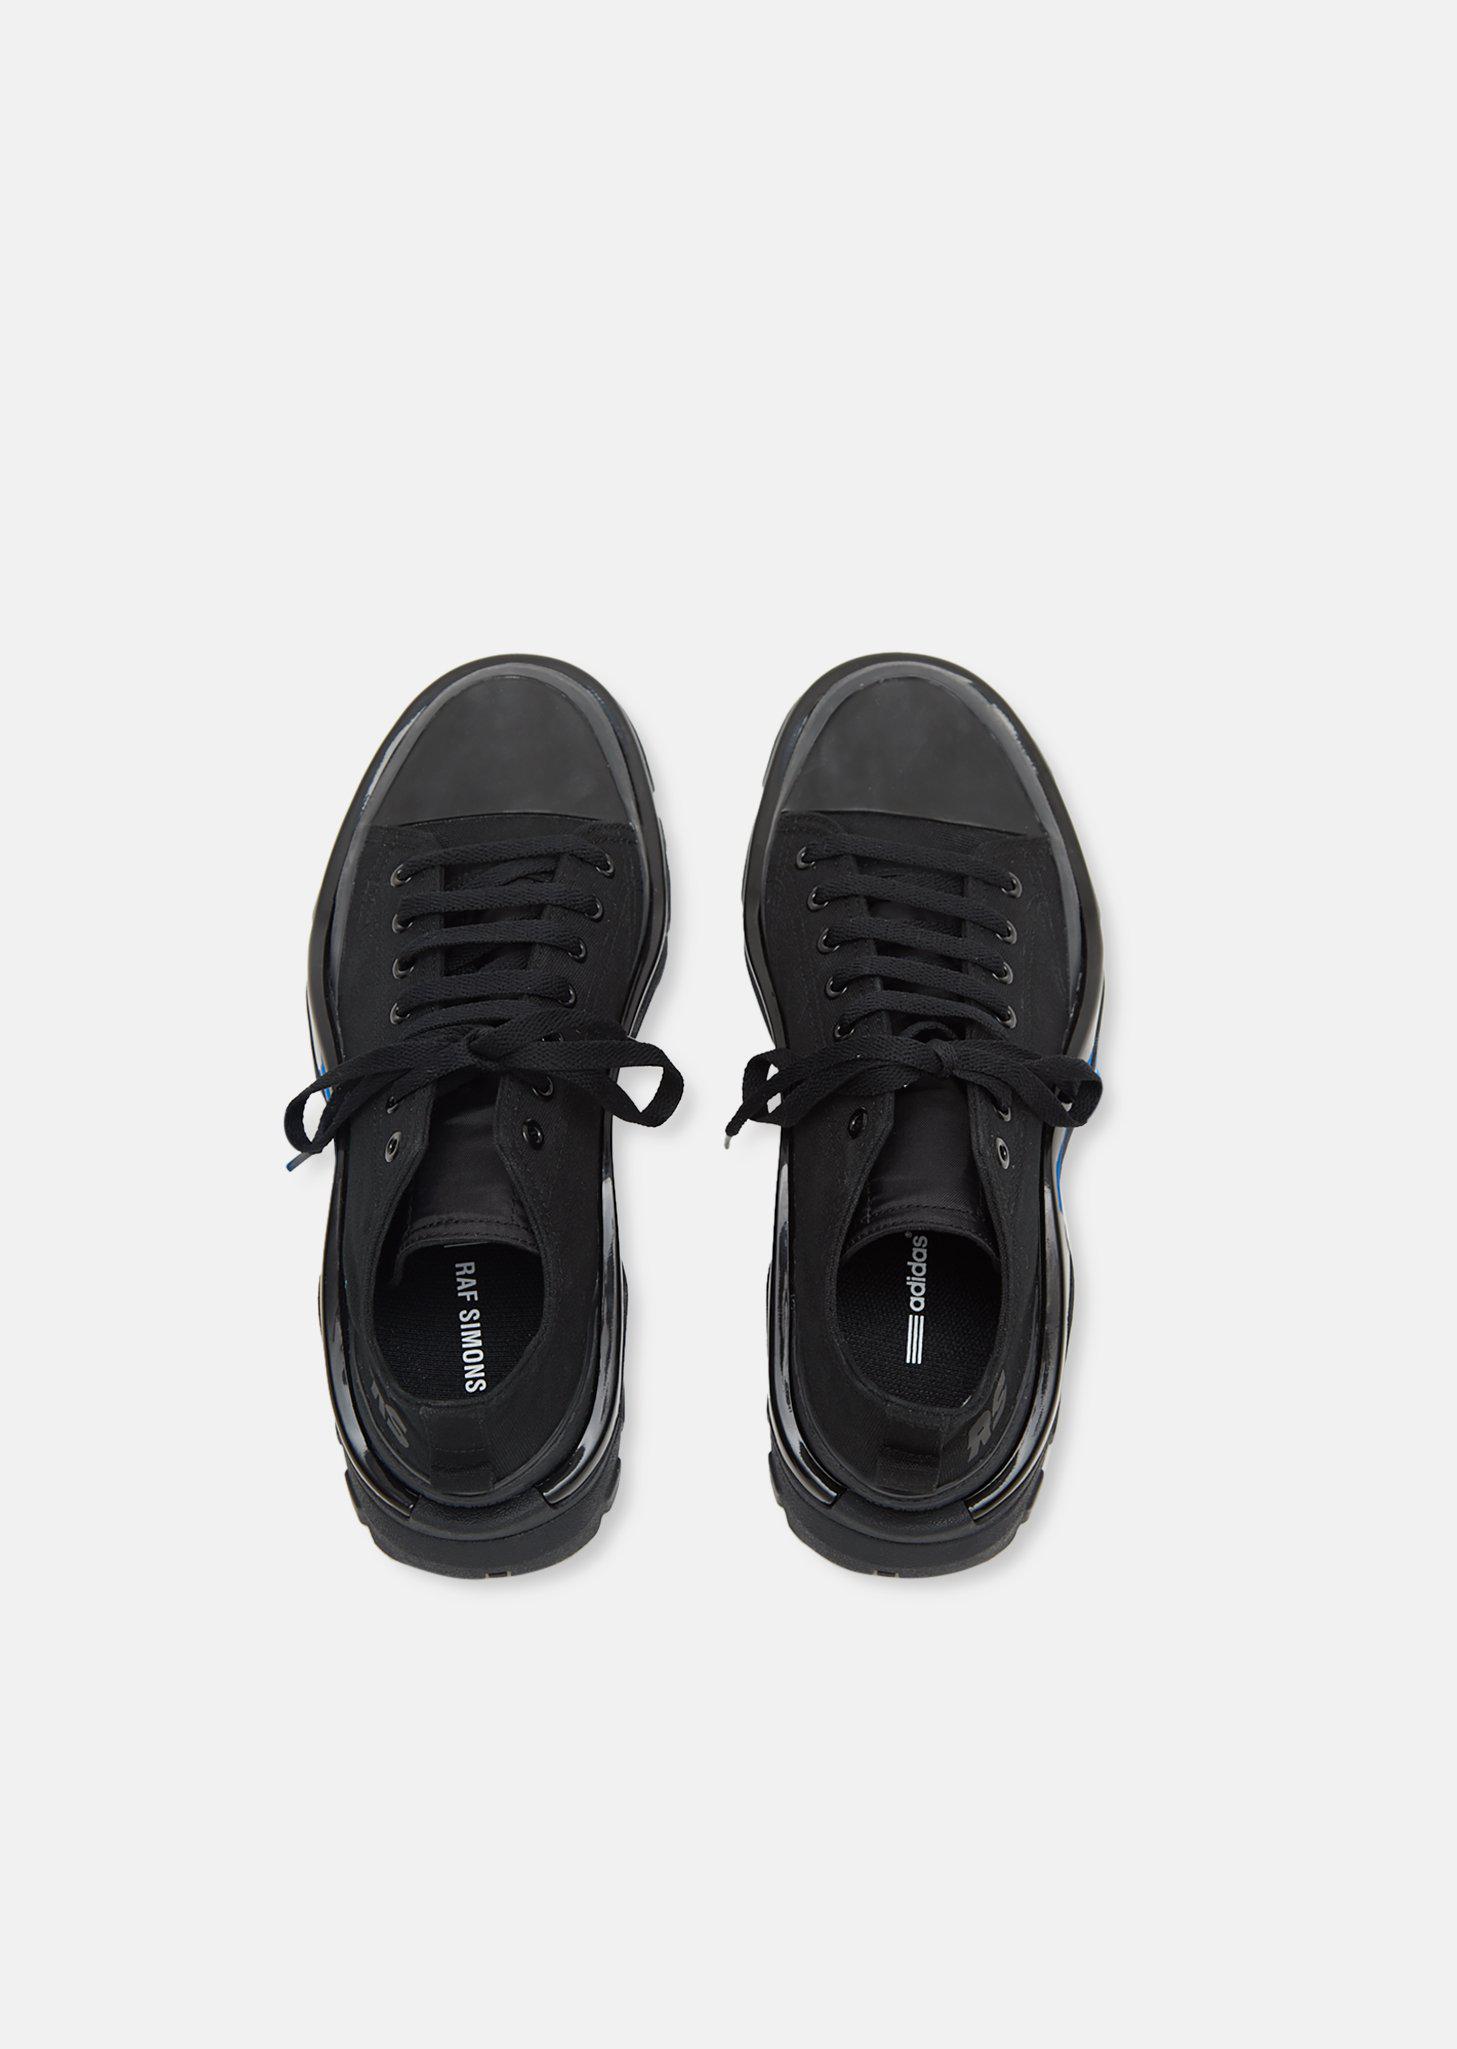 adidas By Raf Simons Canvas Rs Detroit Runner Sneakers in Black | Lyst